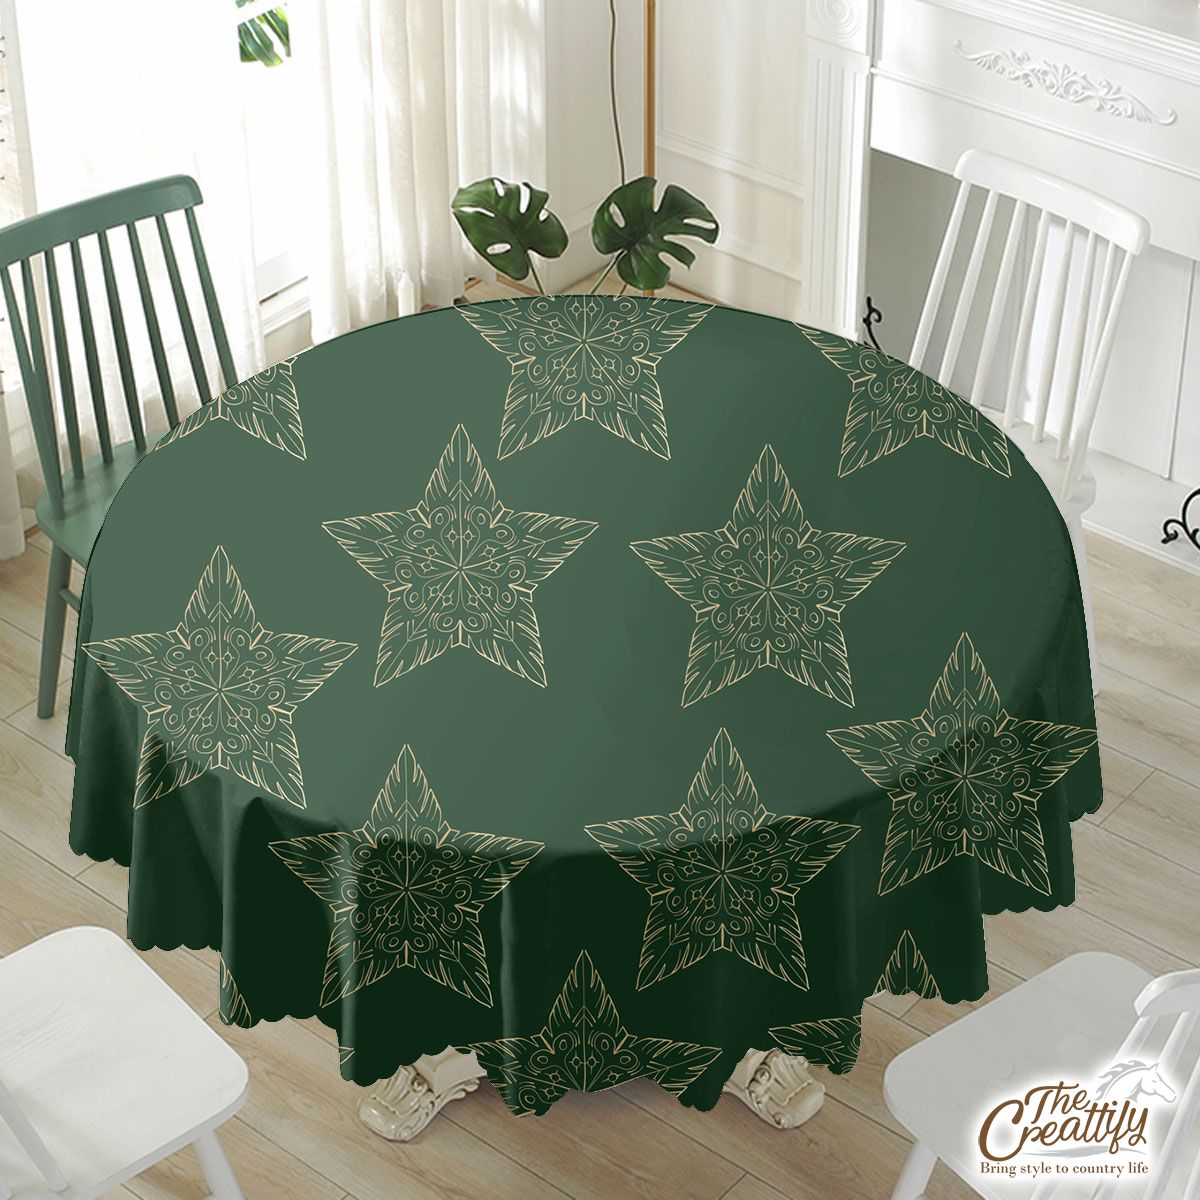 Gold And Green Christmas Star Waterproof Tablecloth